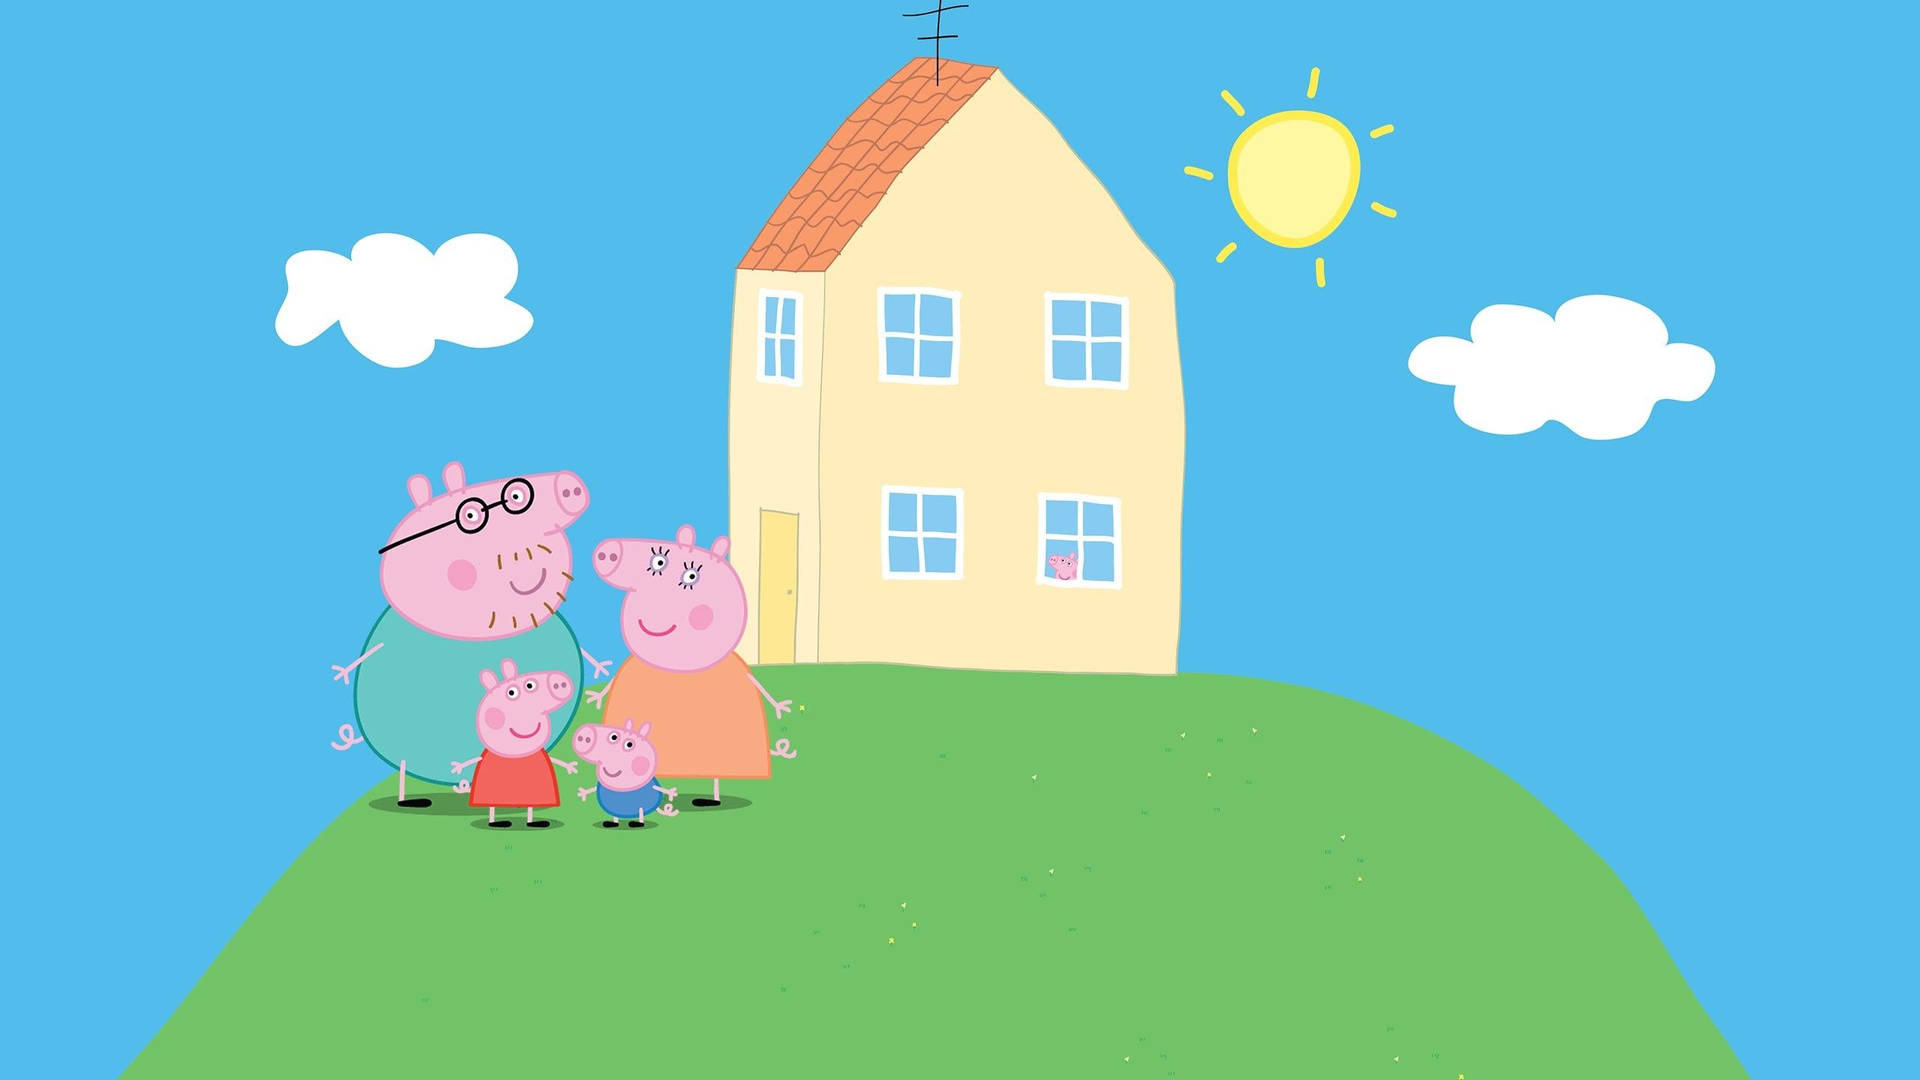 Top 999+ Peppa Pig House Wallpaper Full HD, 4K✅Free to Use